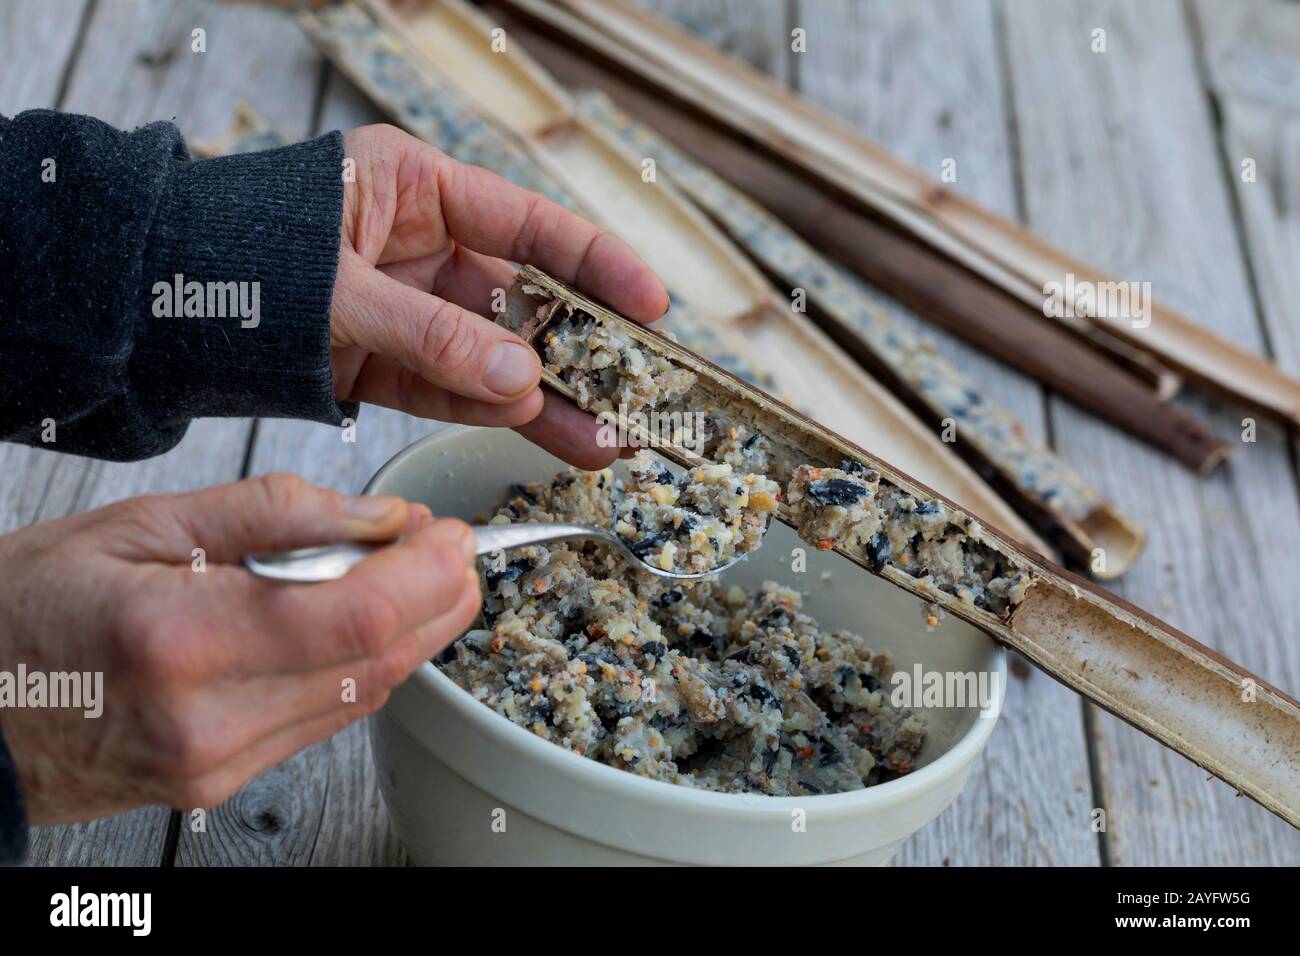 hollow plant stems are halved to fill with selfmade bird food, Germany Stock Photo